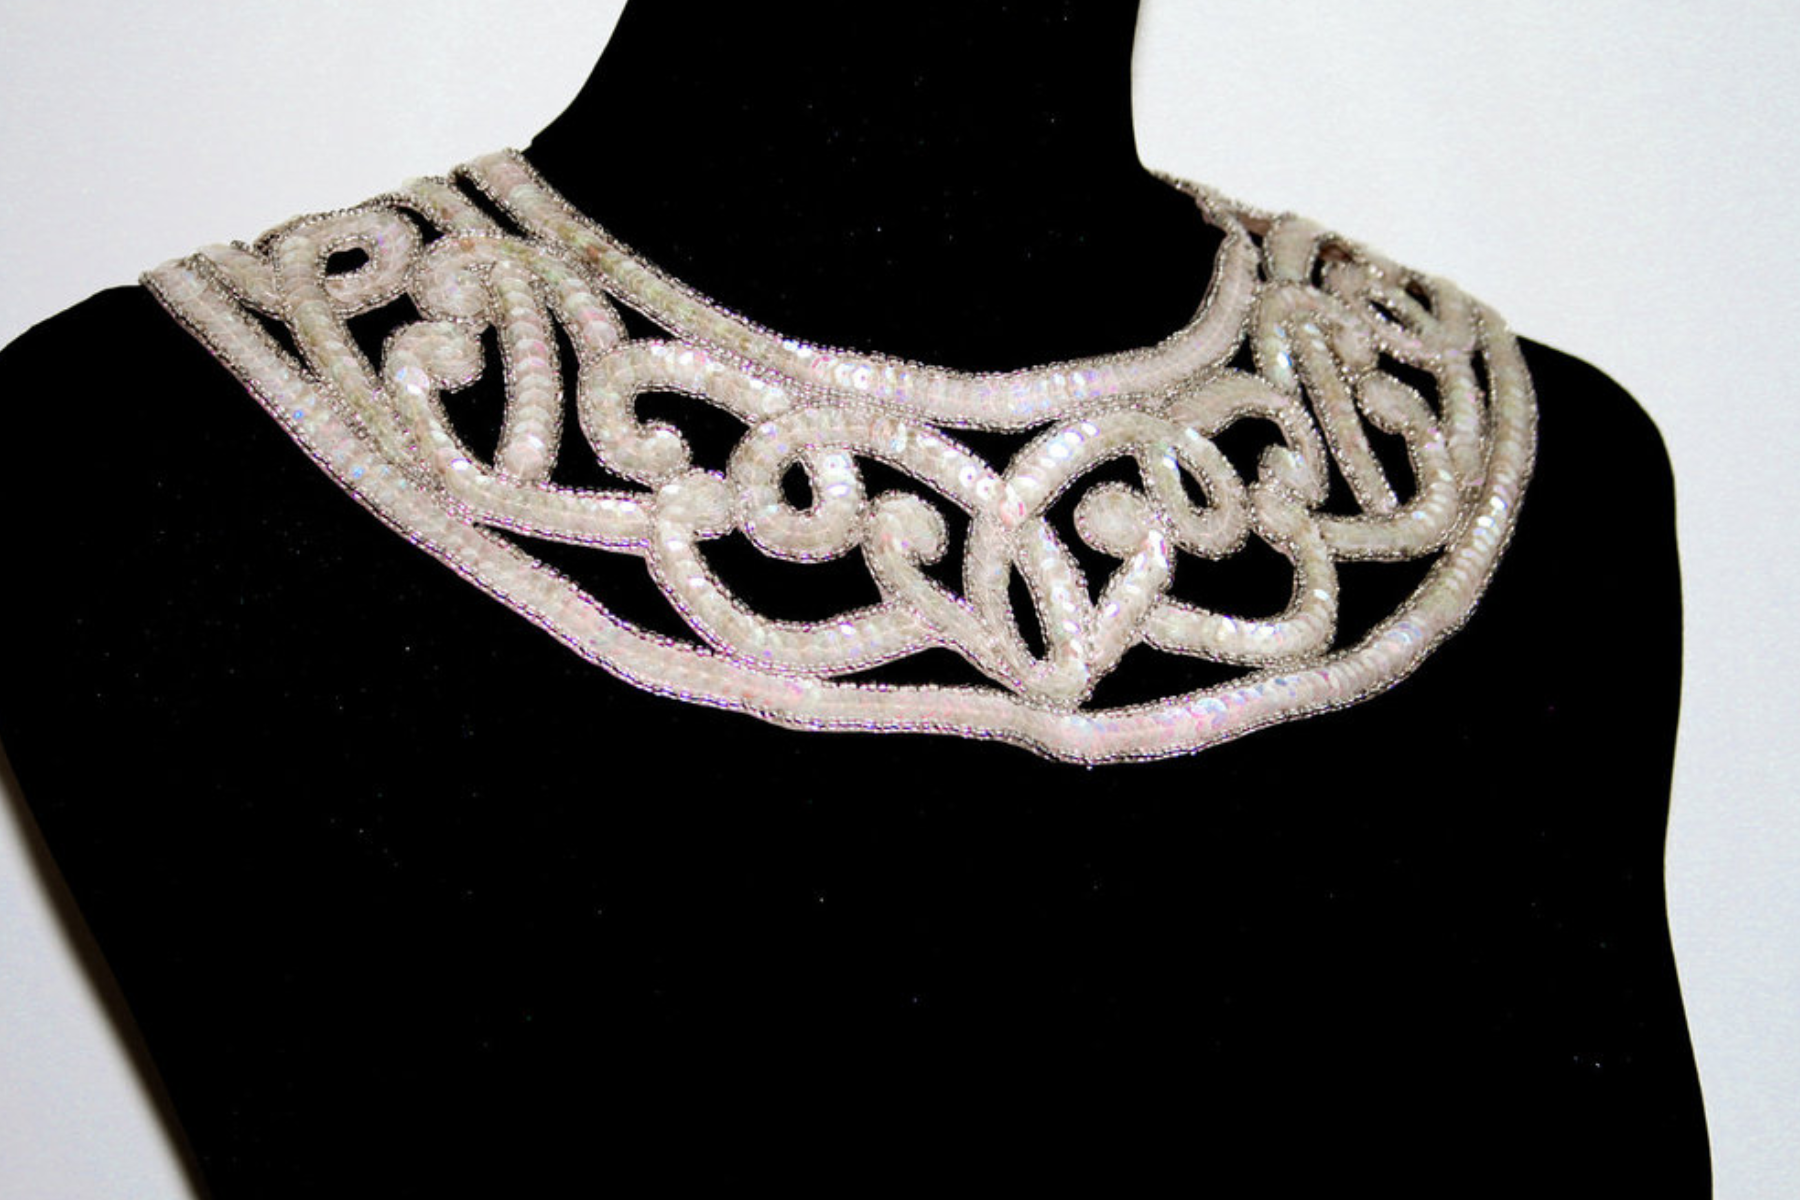 On a black body figure, an art deco statement necklace is displayed